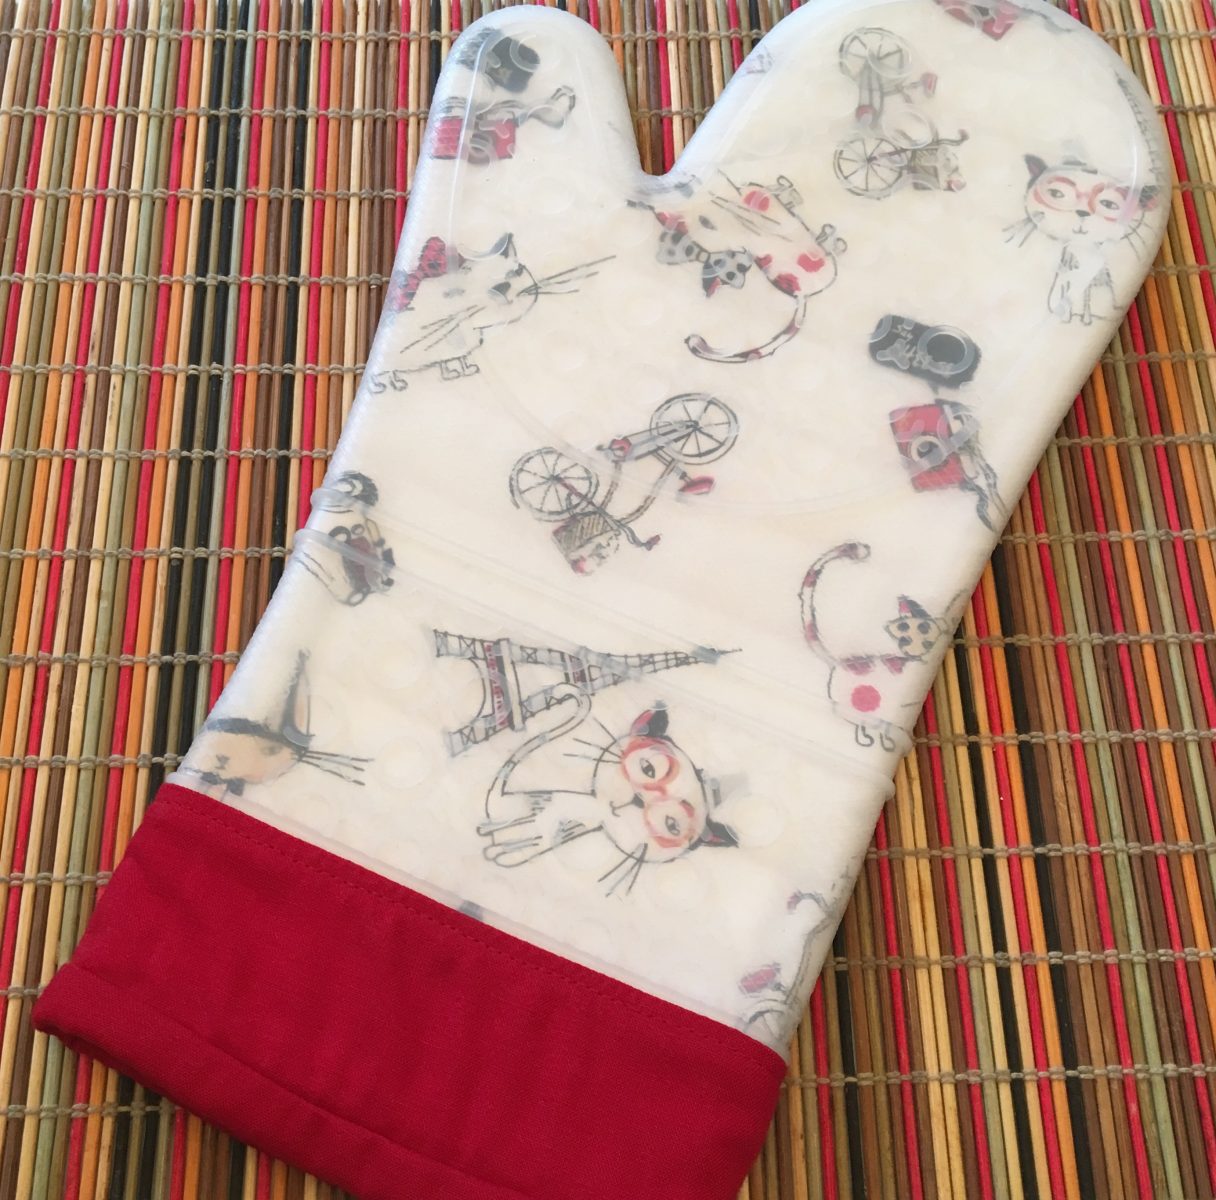 Hot Stuff Everyday Silicone Oven Mitt Sewing Pattern From Around